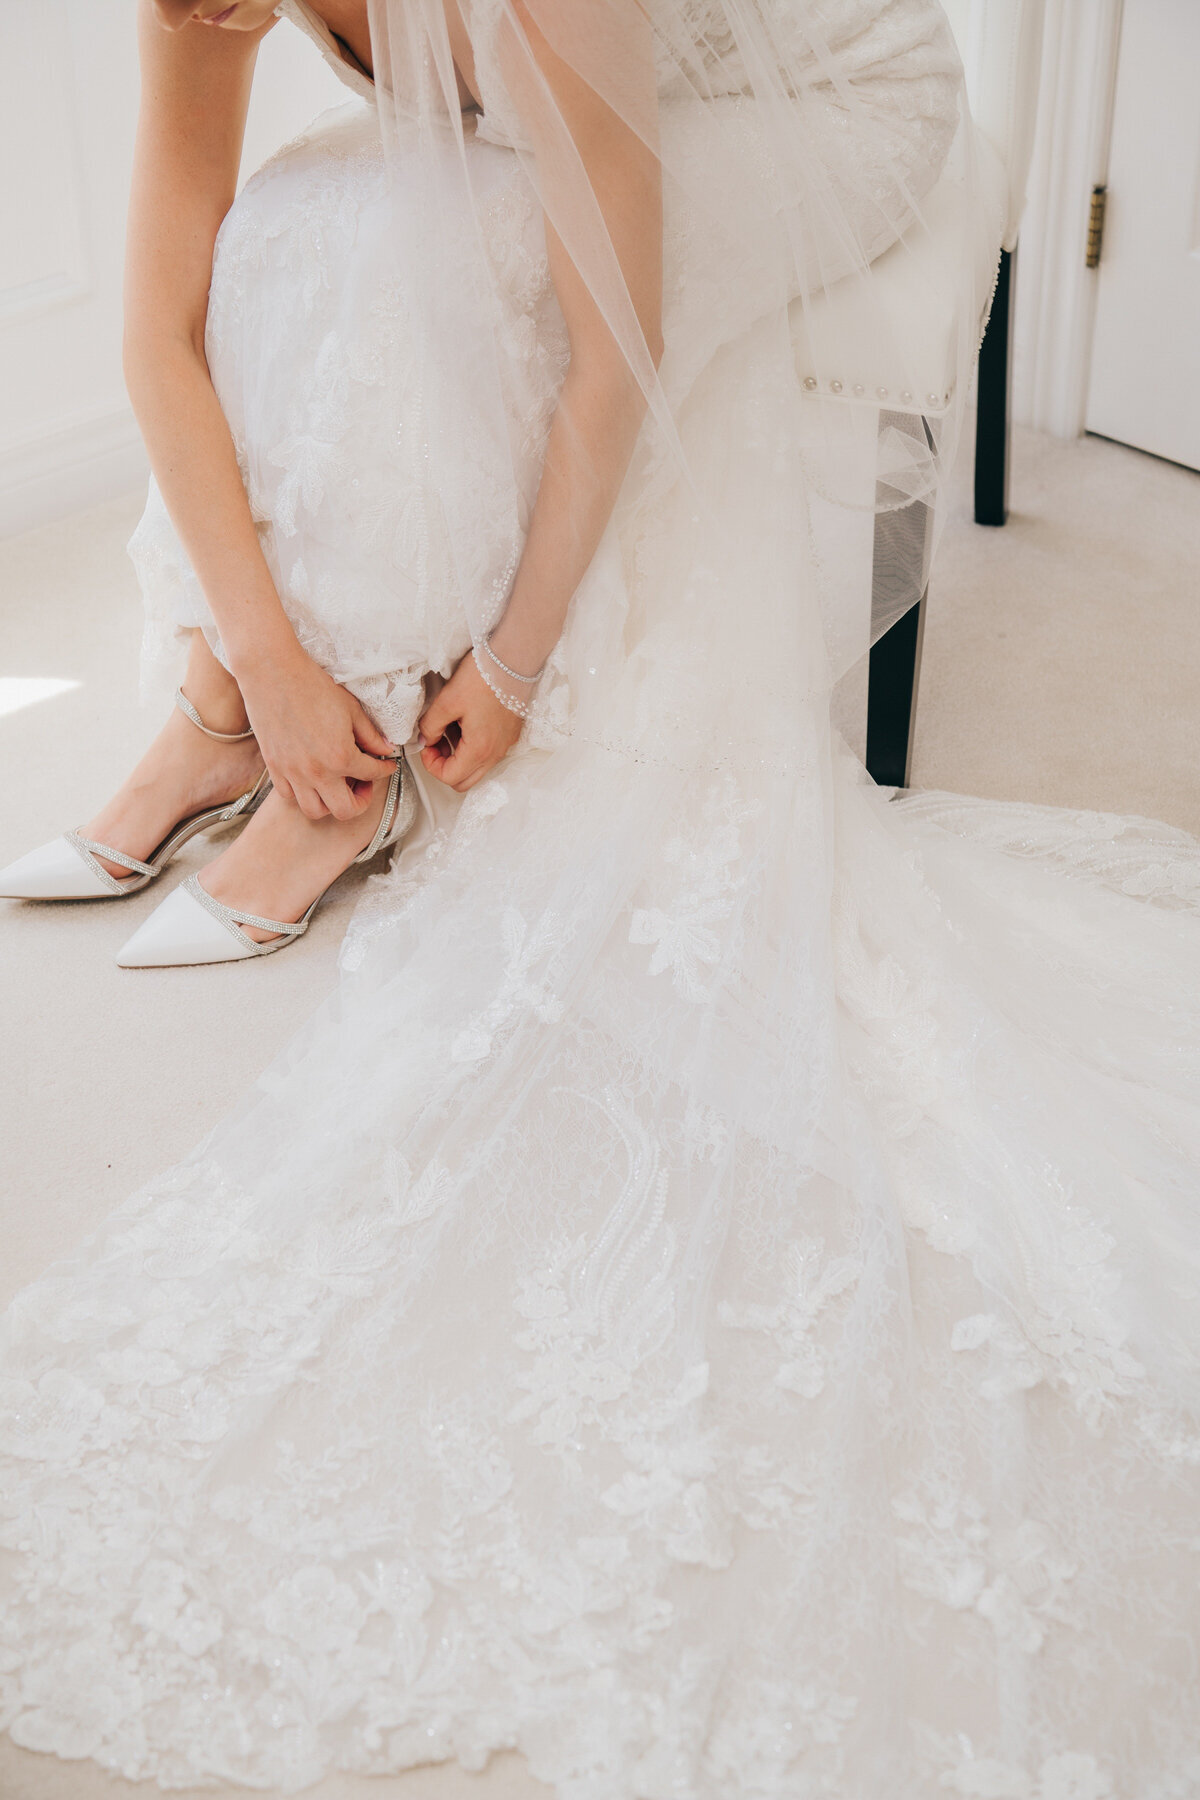 Th bride doing up her white wedding shoes